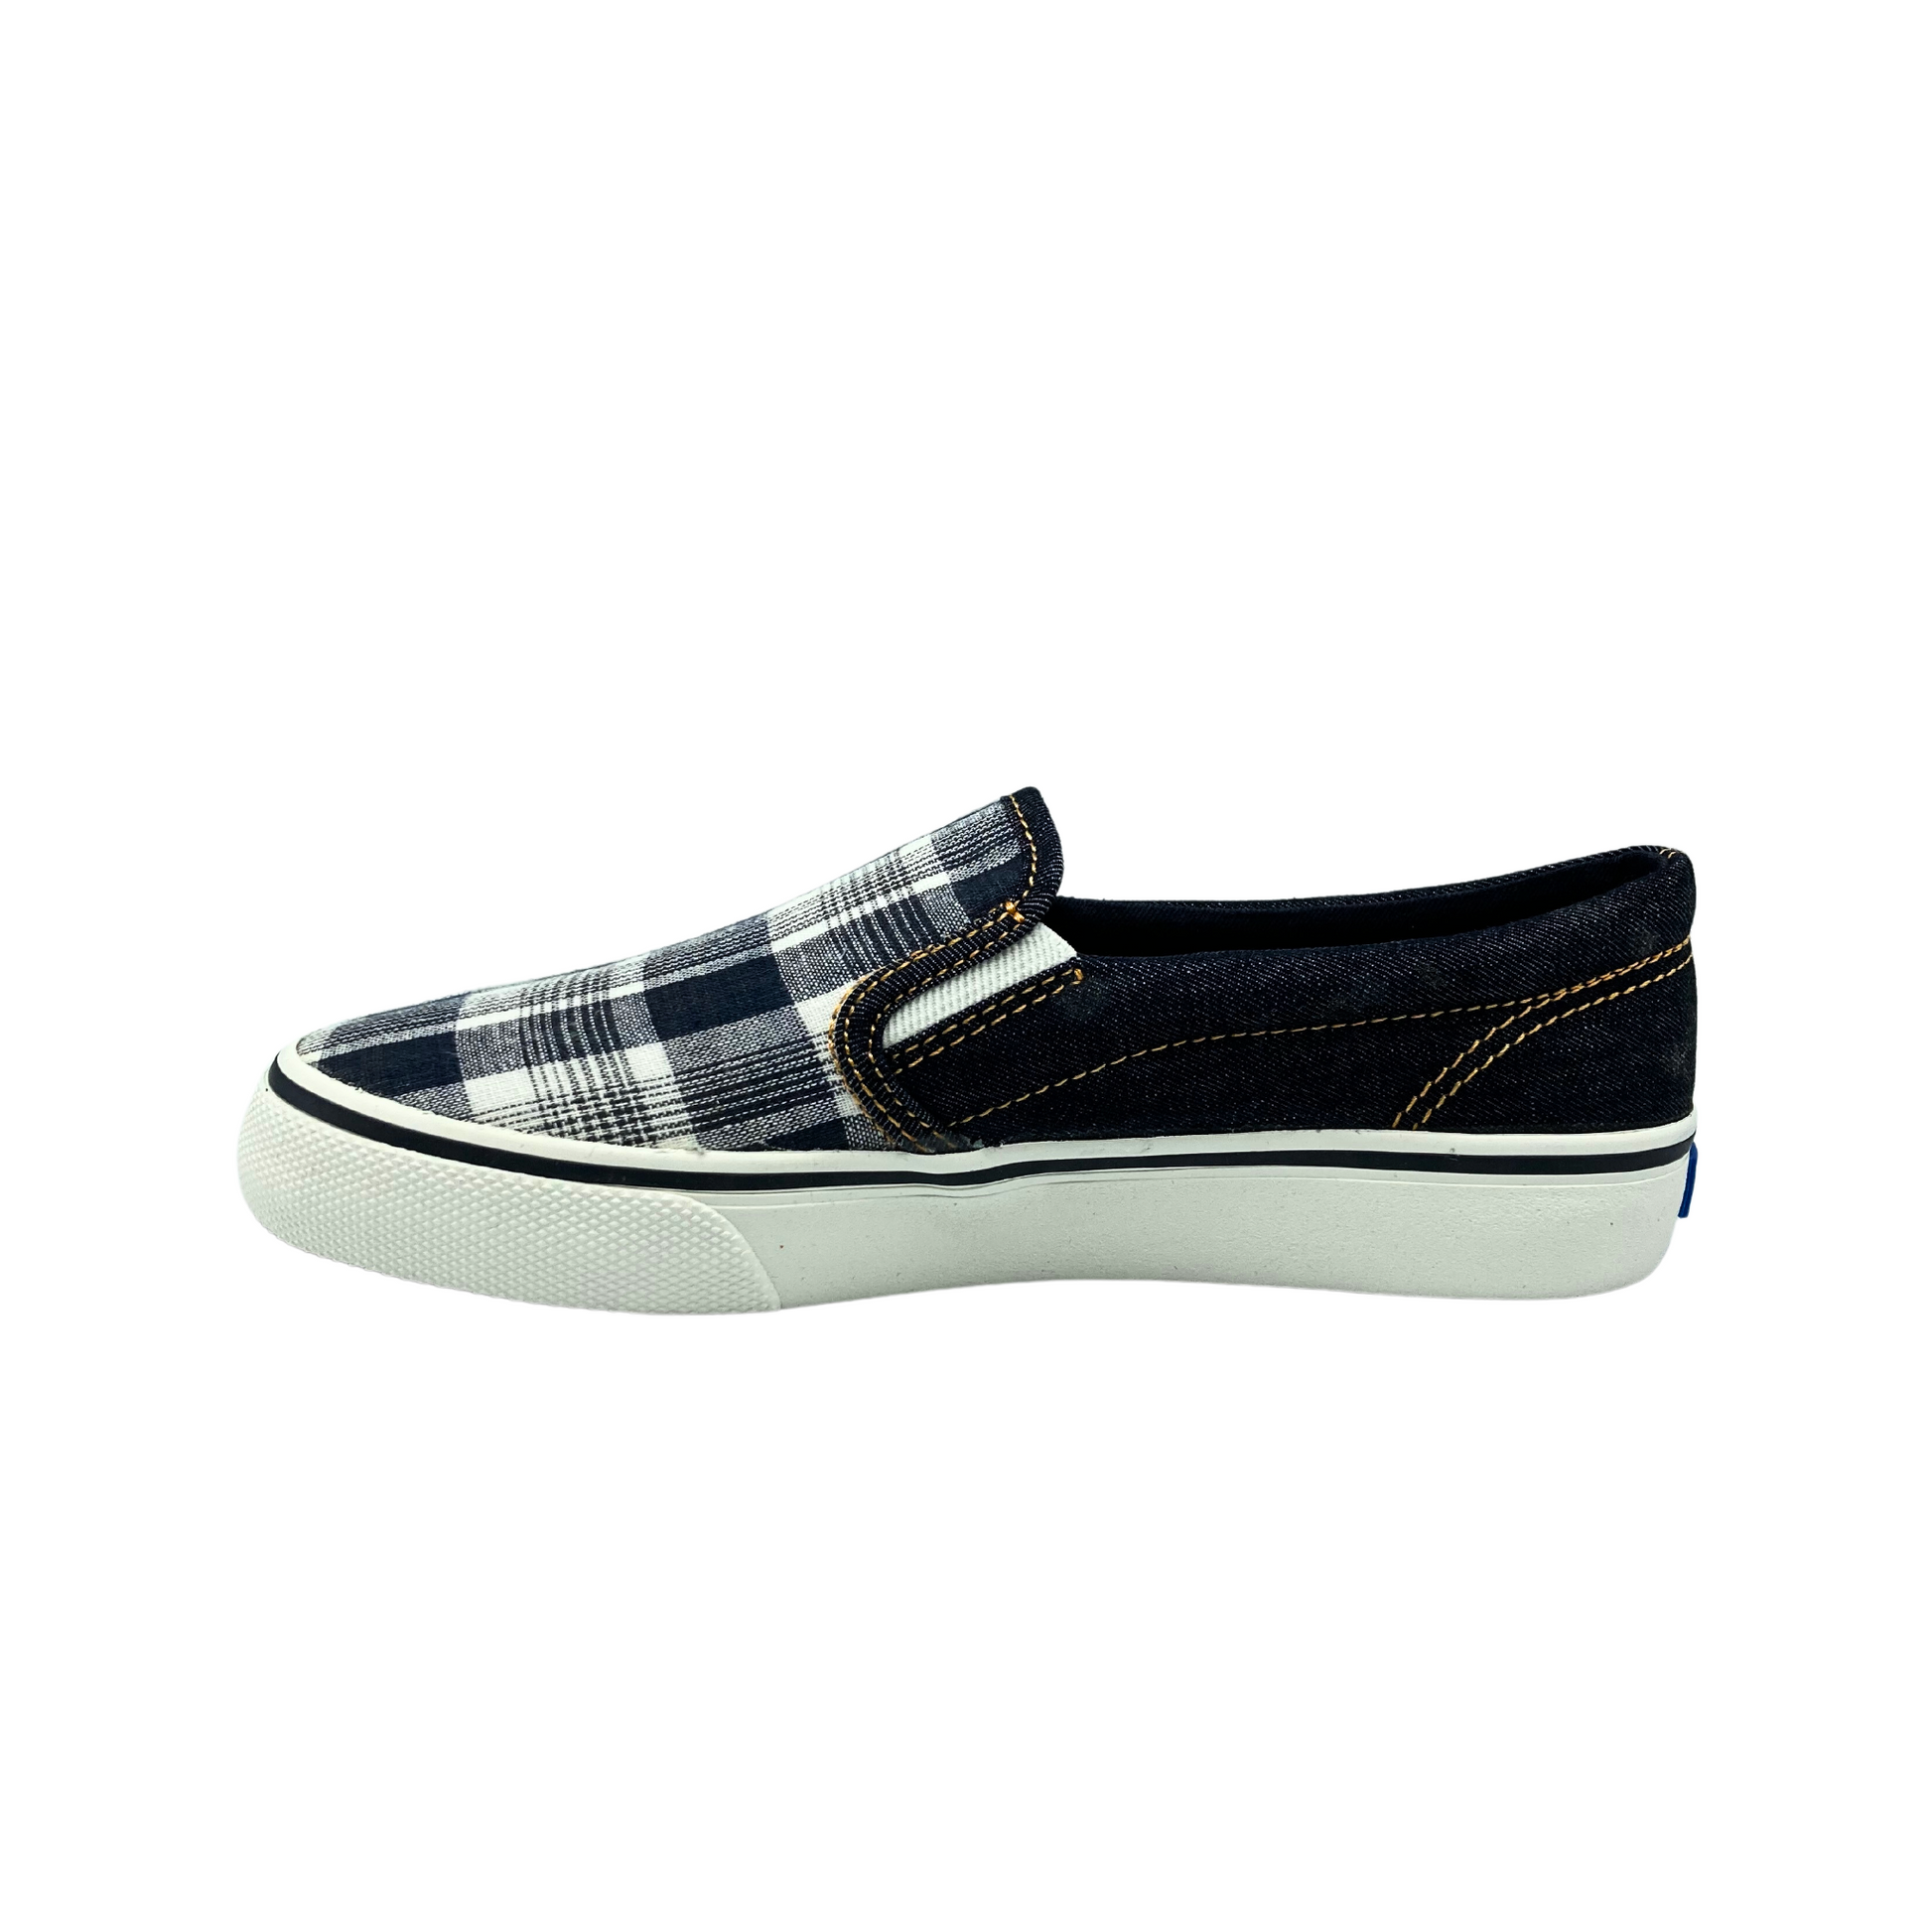 Inside view of a canvas slip on sneaker in a black denim plaid.  Sole is white rubber.  Two discrete elastic panels on either side at top of foot for easy on/off and more comfort when walking